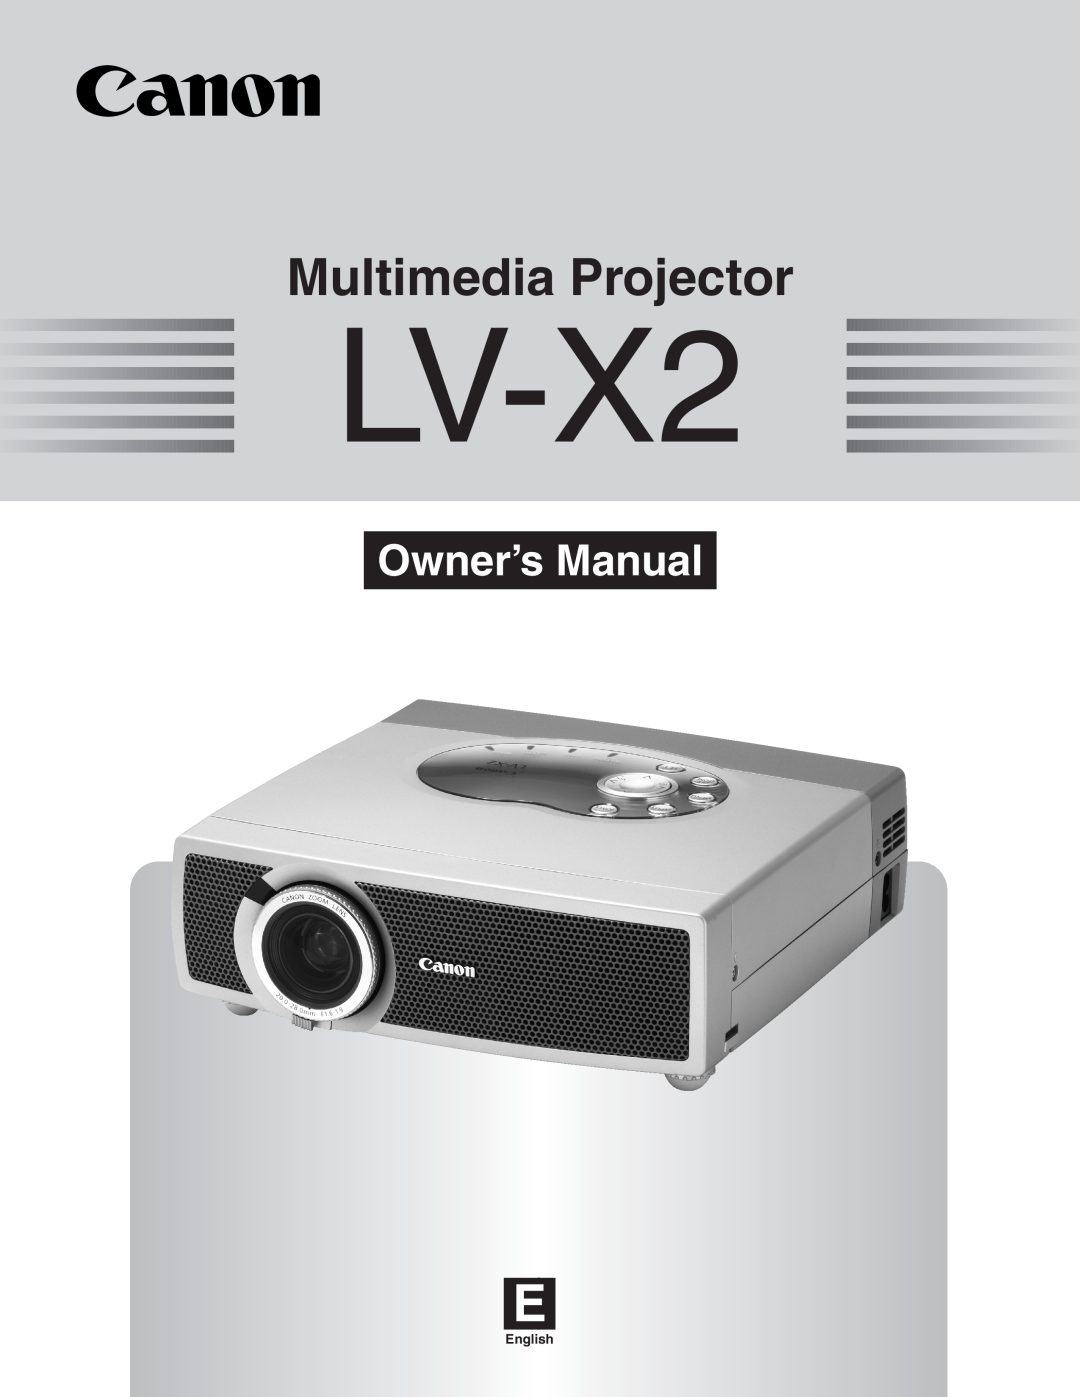 Canon LV-X2 owner manual Multimedia Projector, Owner’s Manual, English 